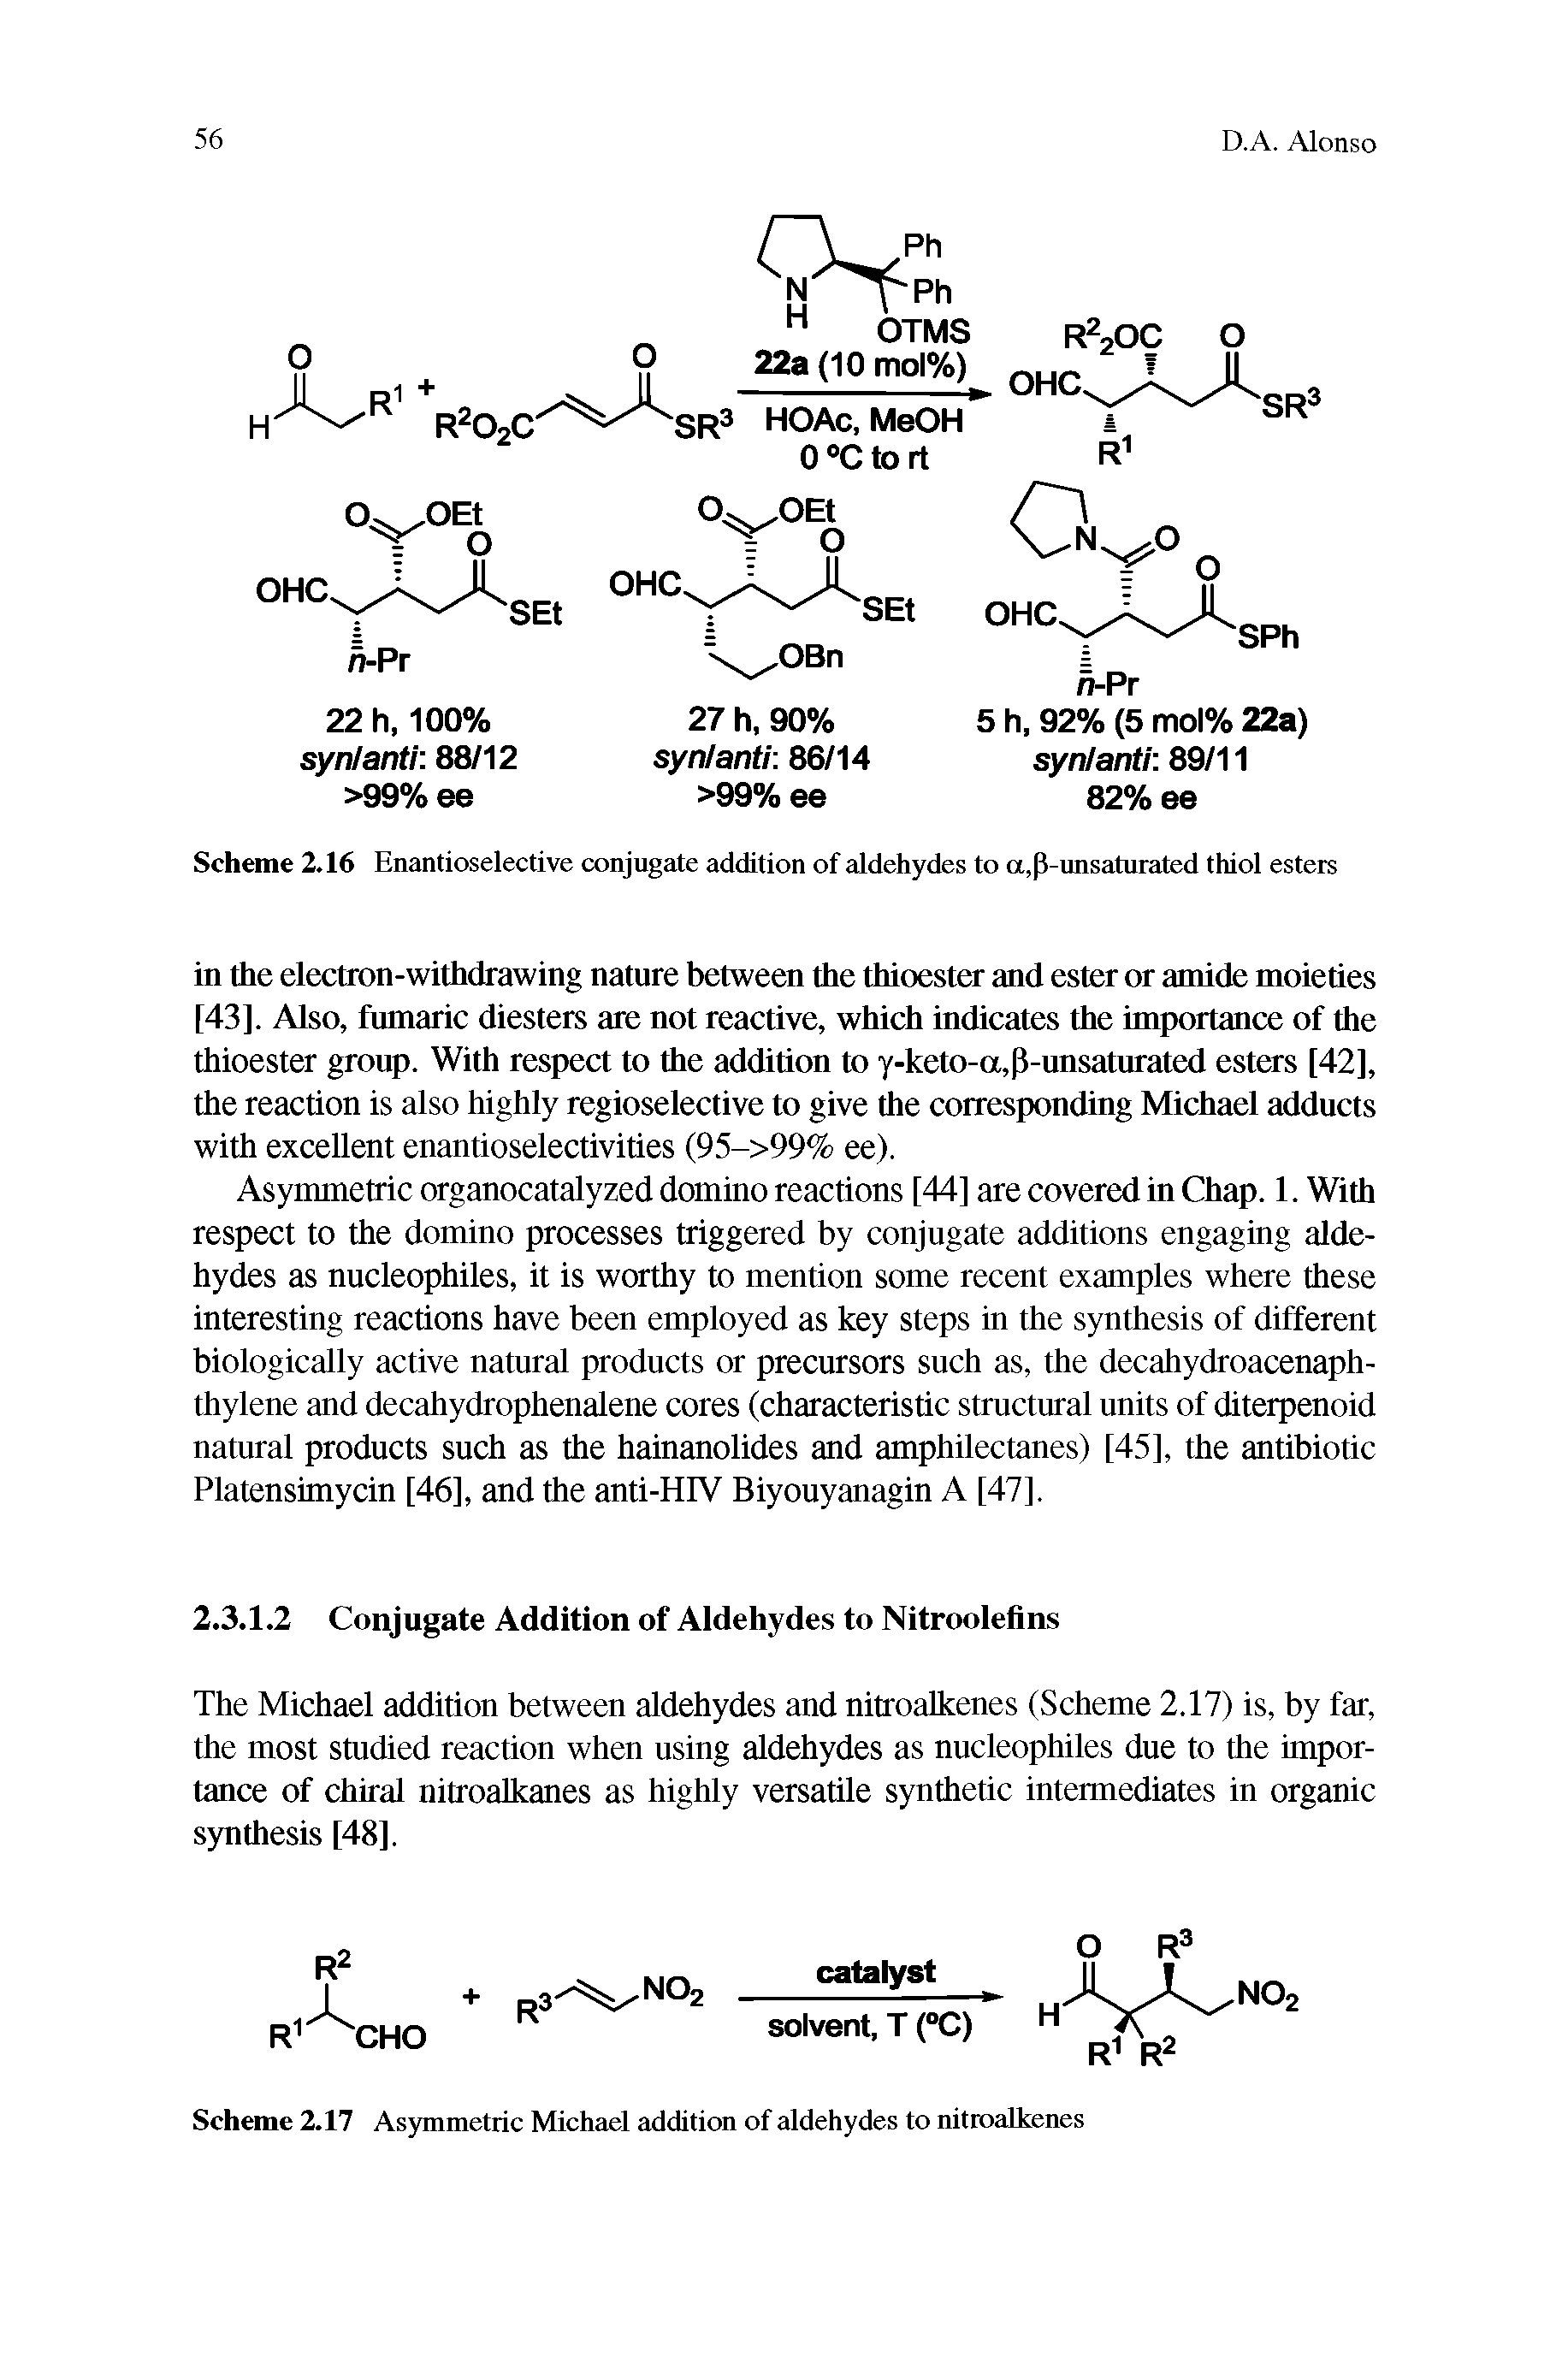 Scheme 2.16 Enantioselective conjugate addition of aldehydes to a,p-unsaturated thiol esters...